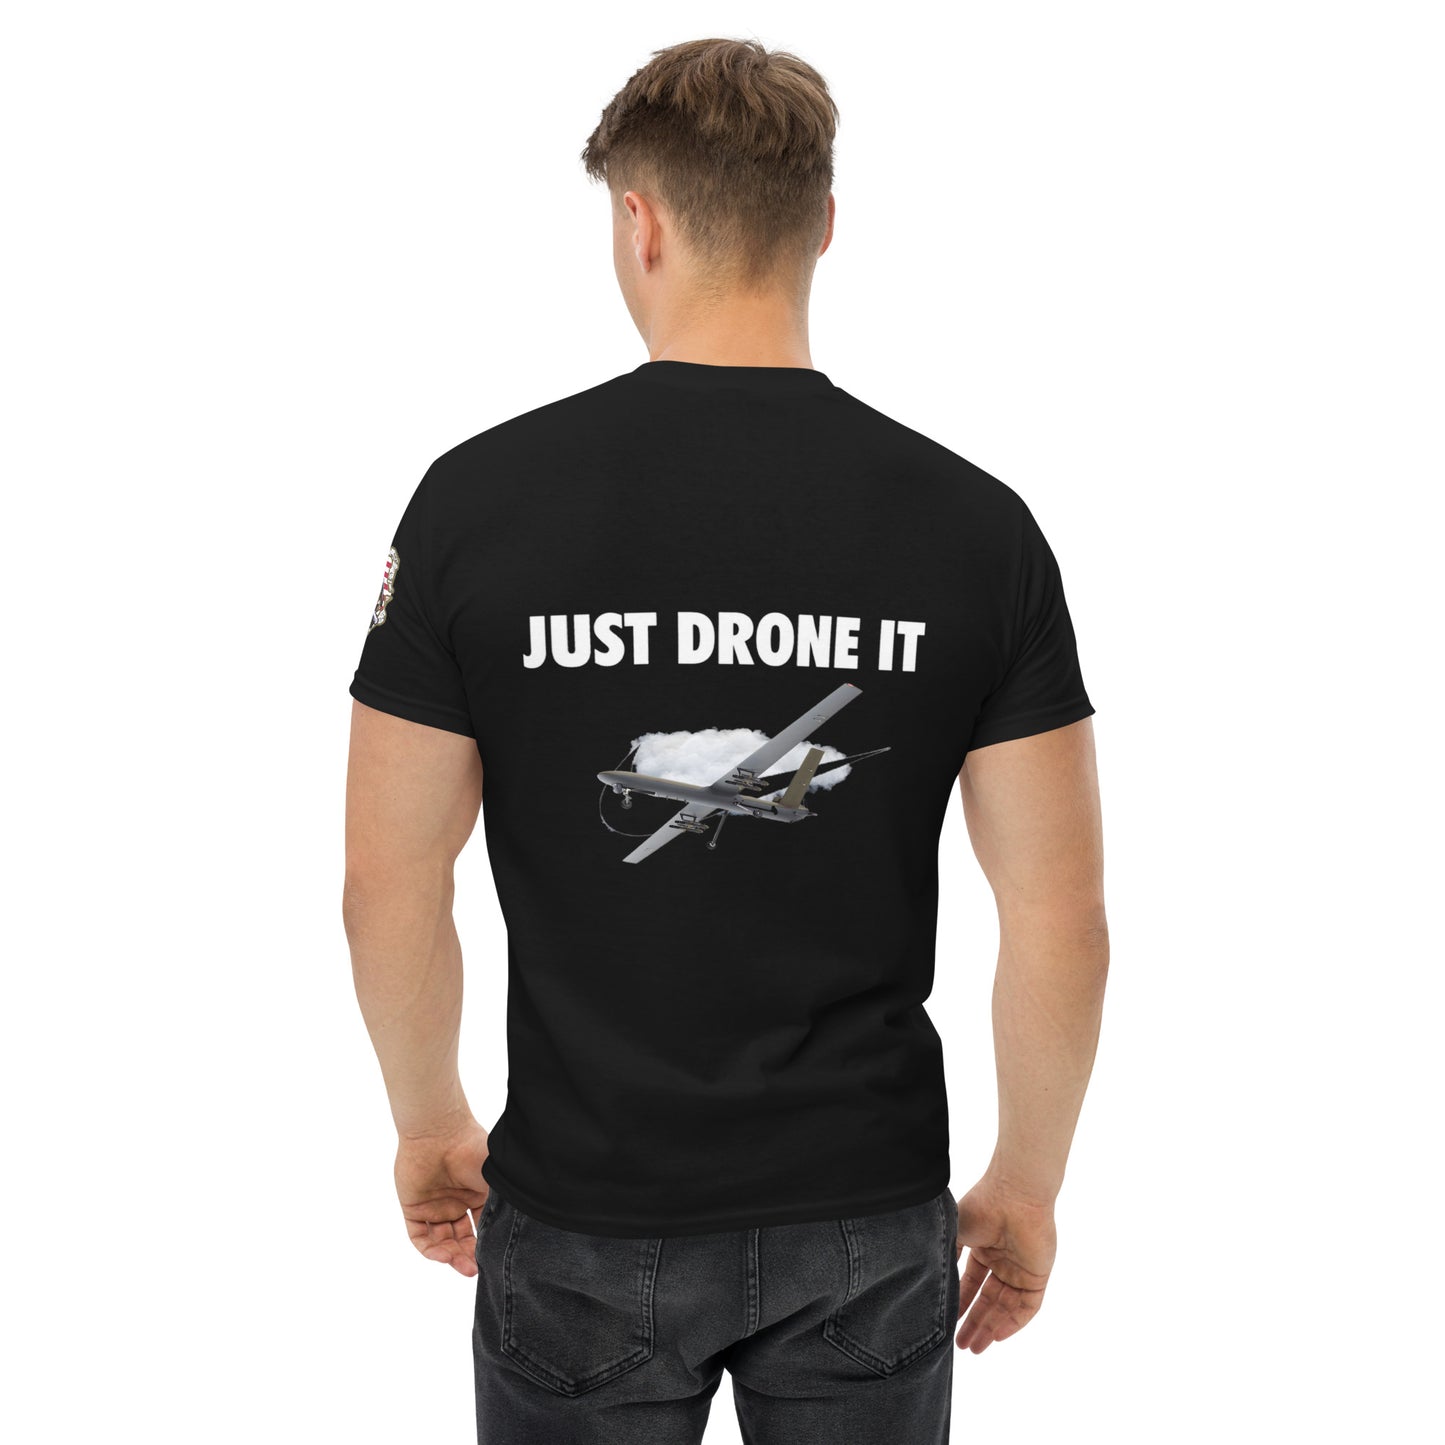 Just Drone It!